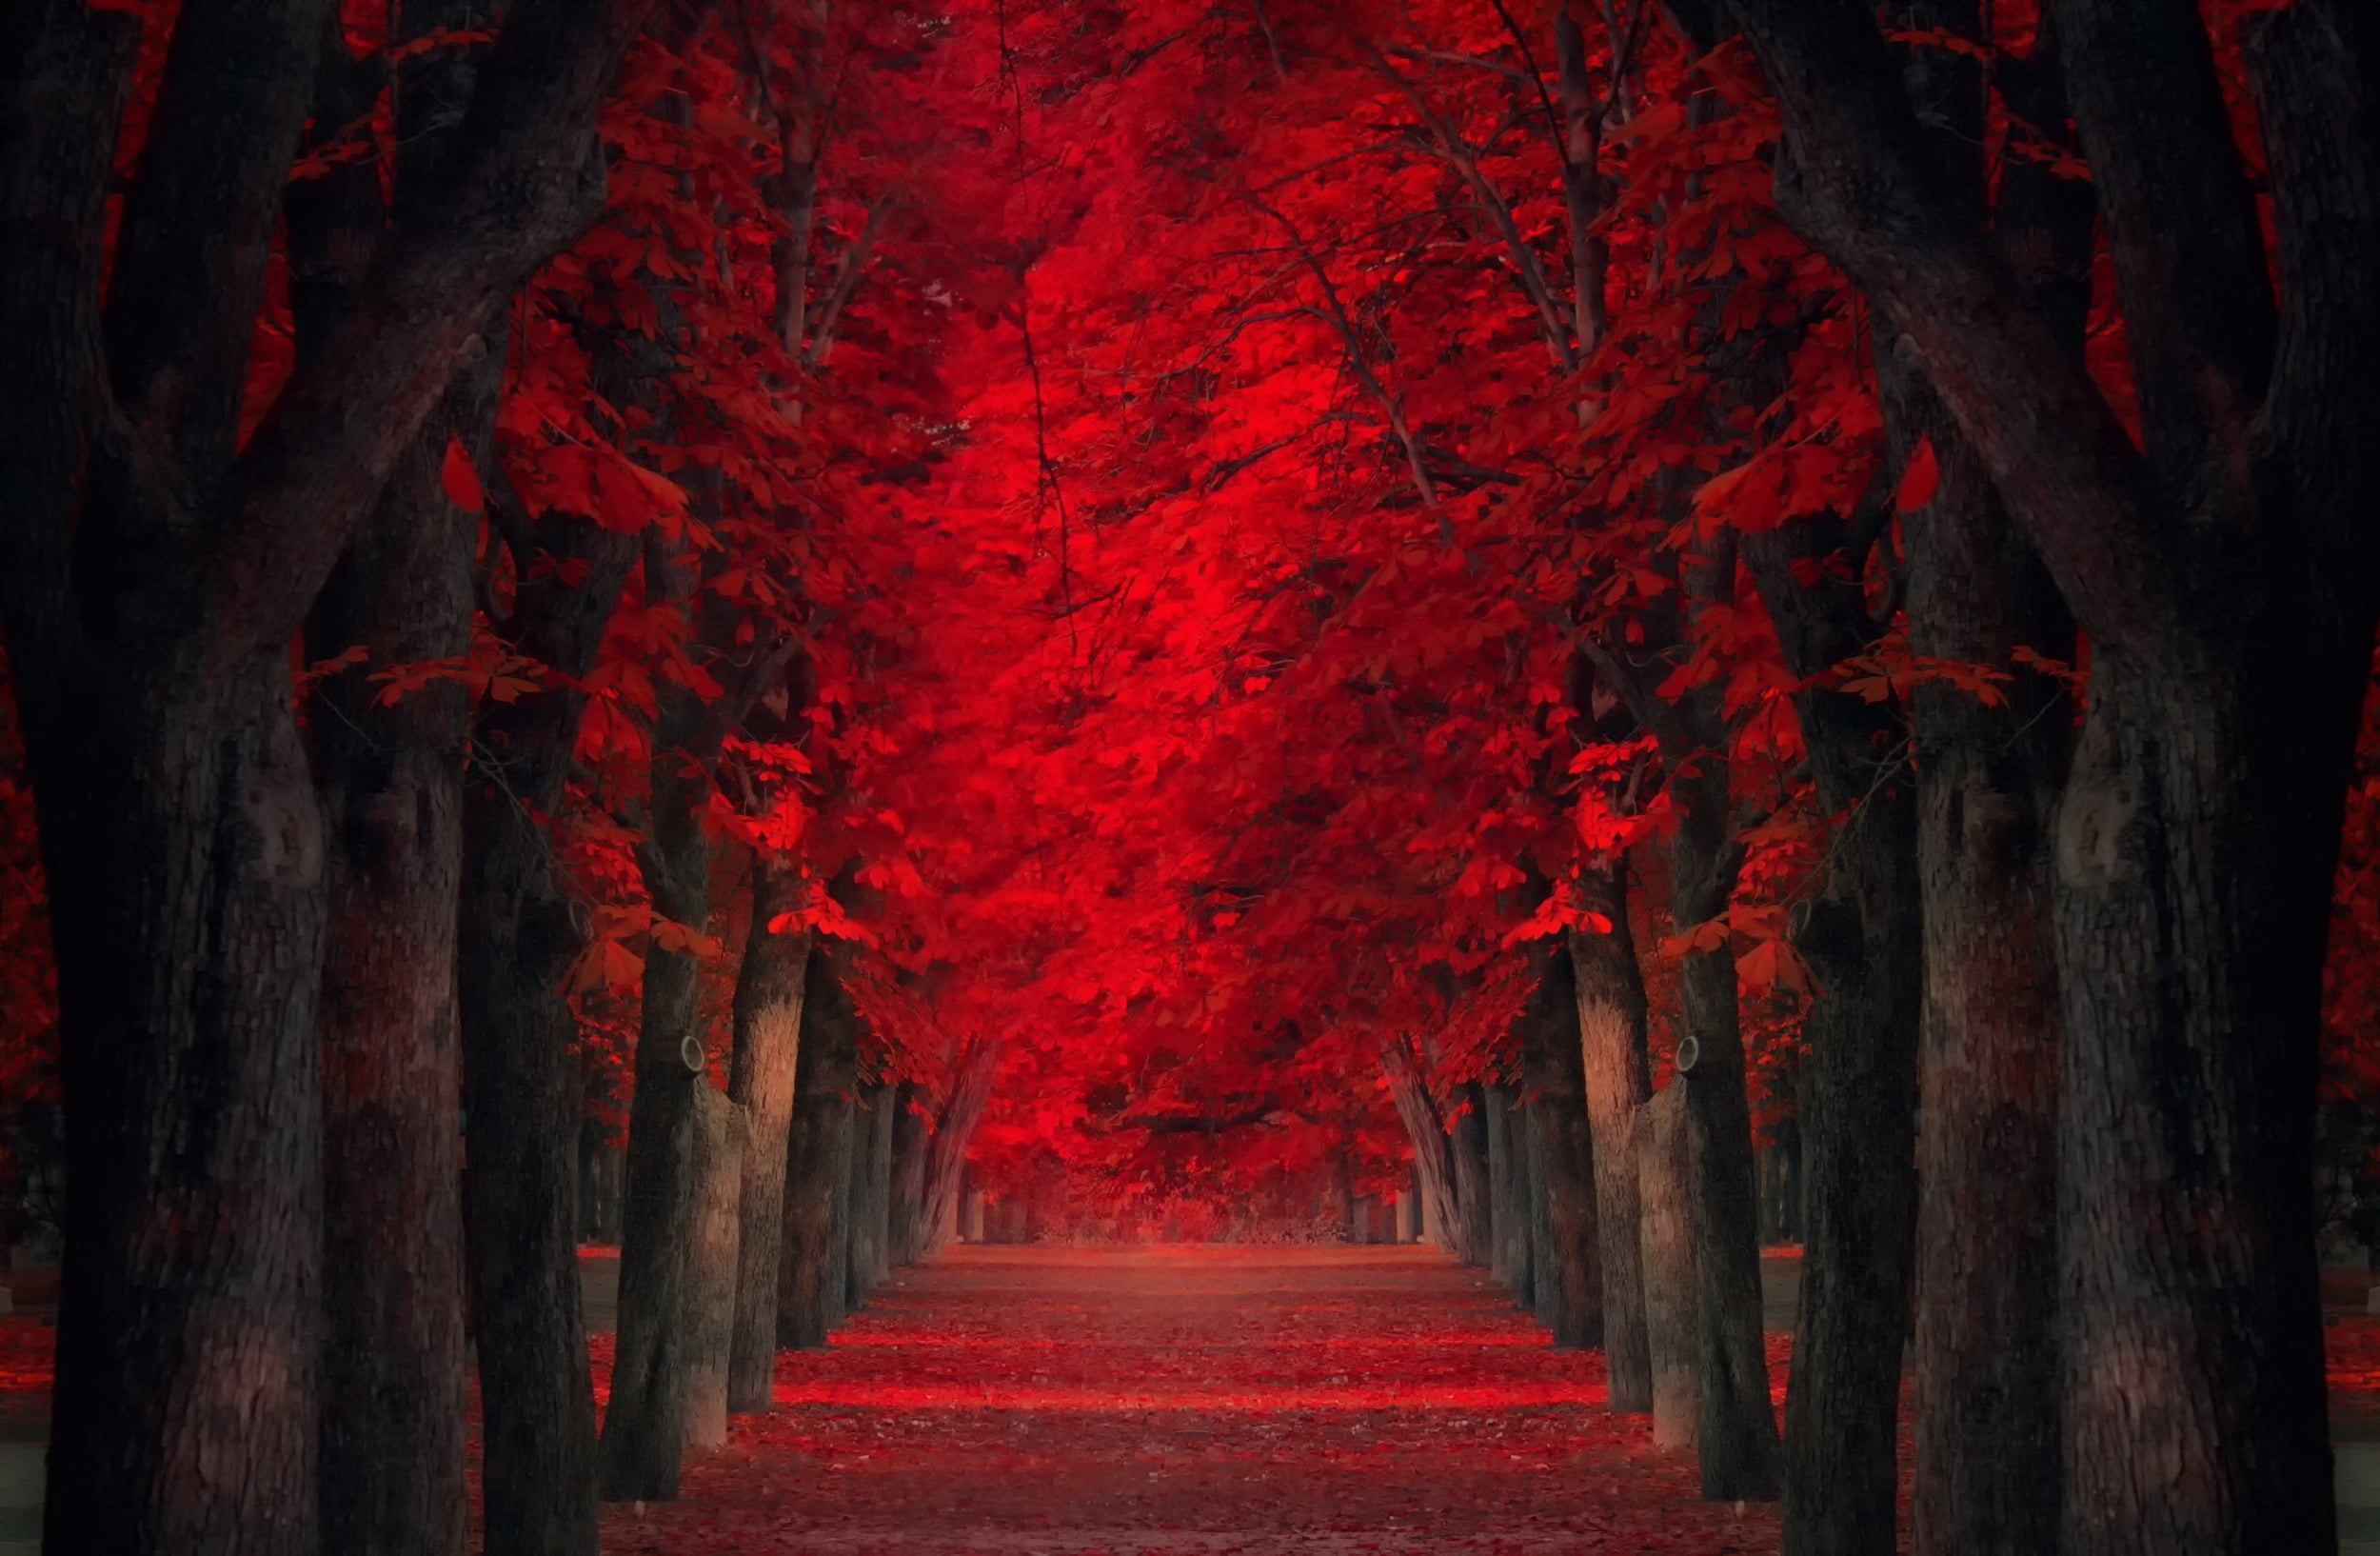 red leafed trees, alley, red leaves, forest, nature, dark, mystery